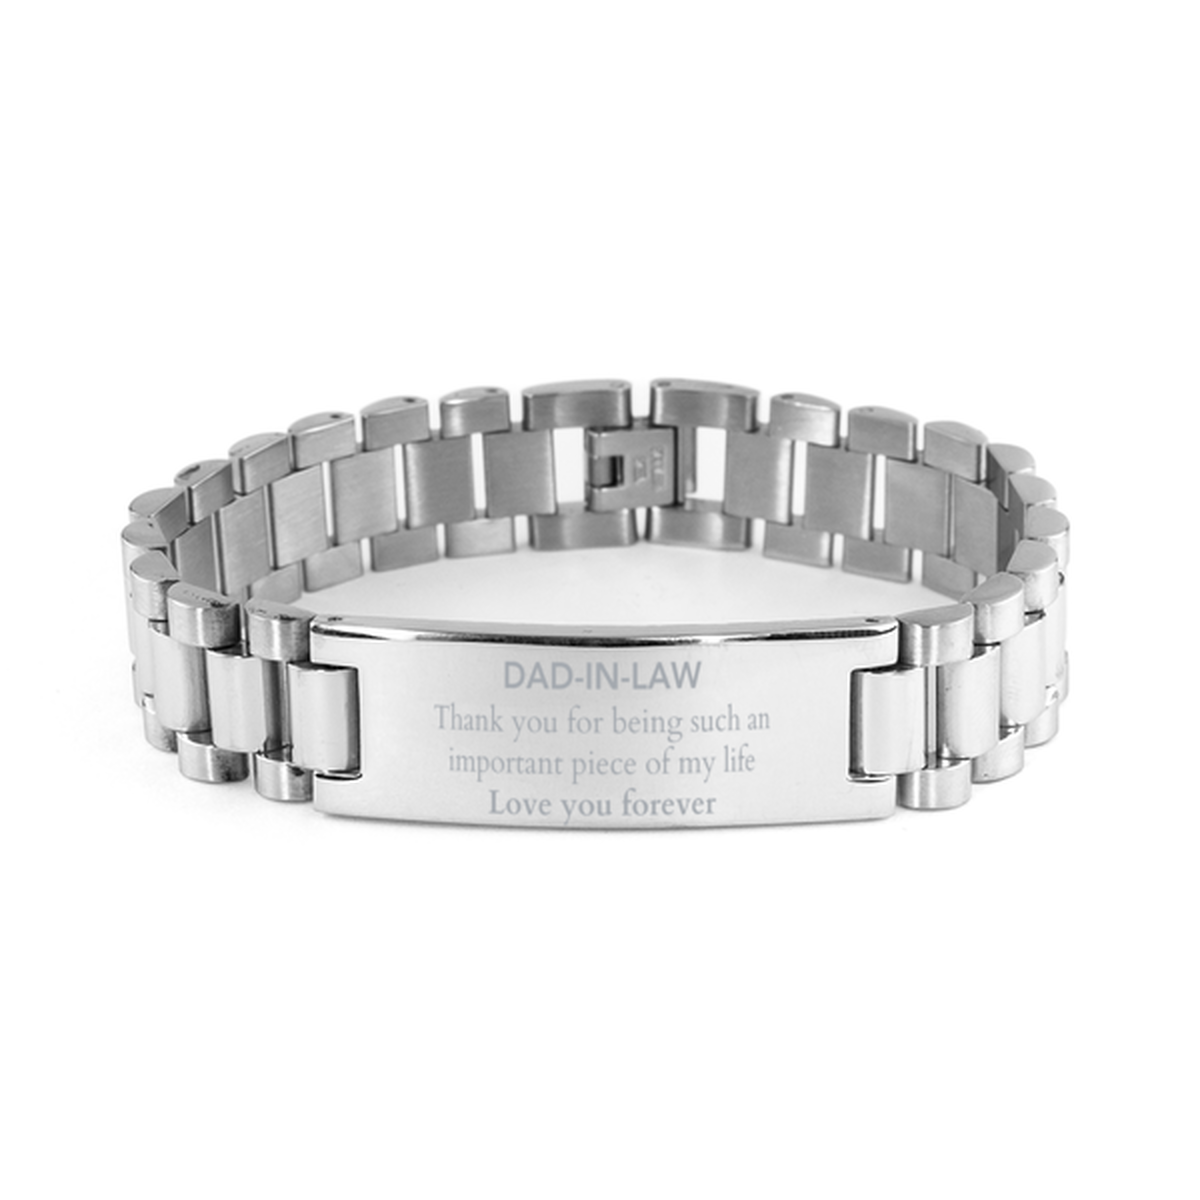 Appropriate Dad-in-law Ladder Stainless Steel Bracelet Epic Birthday Gifts for Dad-in-law Thank you for being such an important piece of my life Dad-in-law Christmas Mothers Fathers Day